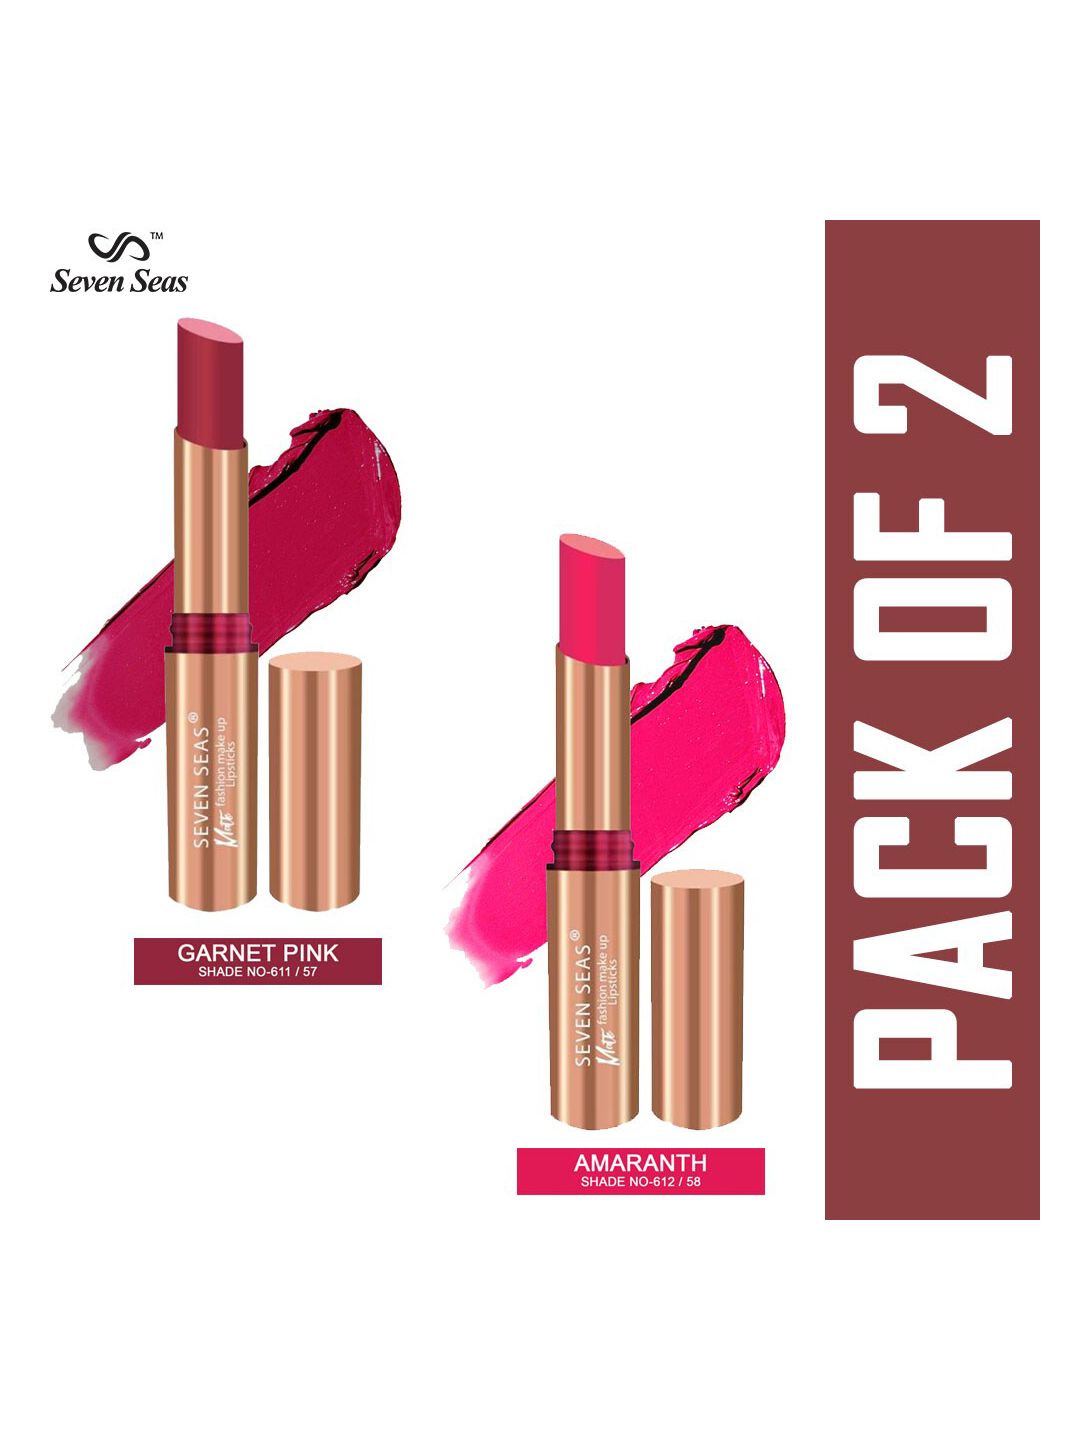 Seven Seas Set of 2 Matte With You Lipstick - Garnet Pink 611/57 & Amaranth 612/58 Price in India